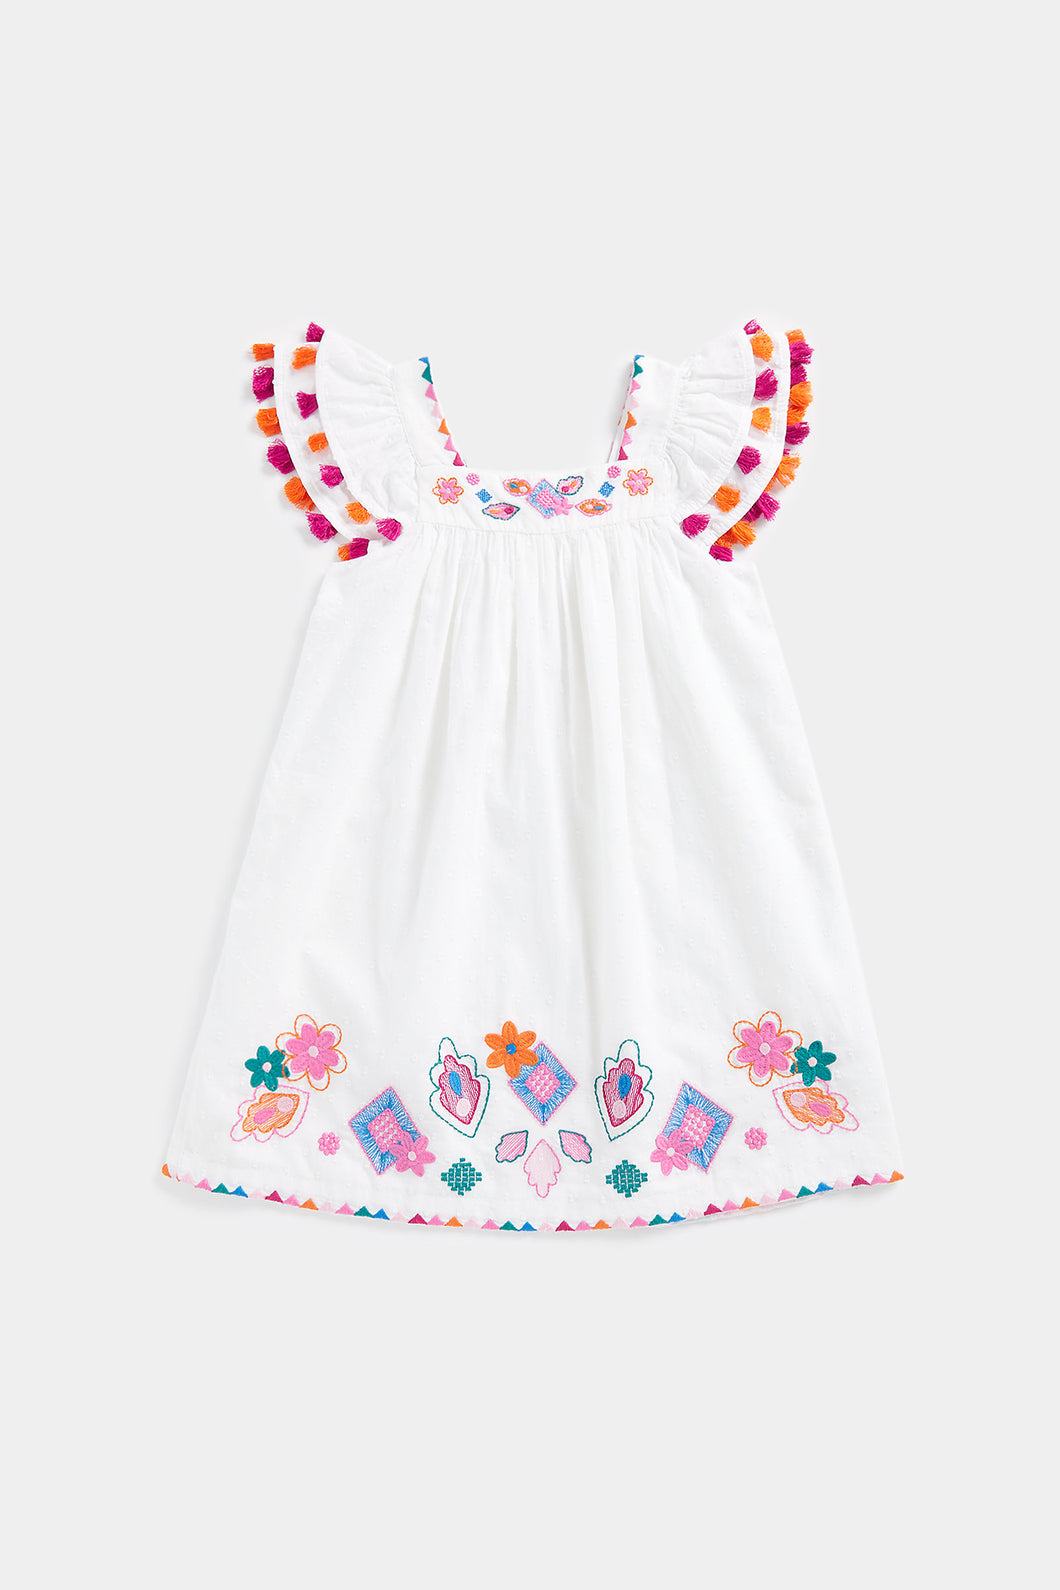 Mothercare White Embroidered Dress